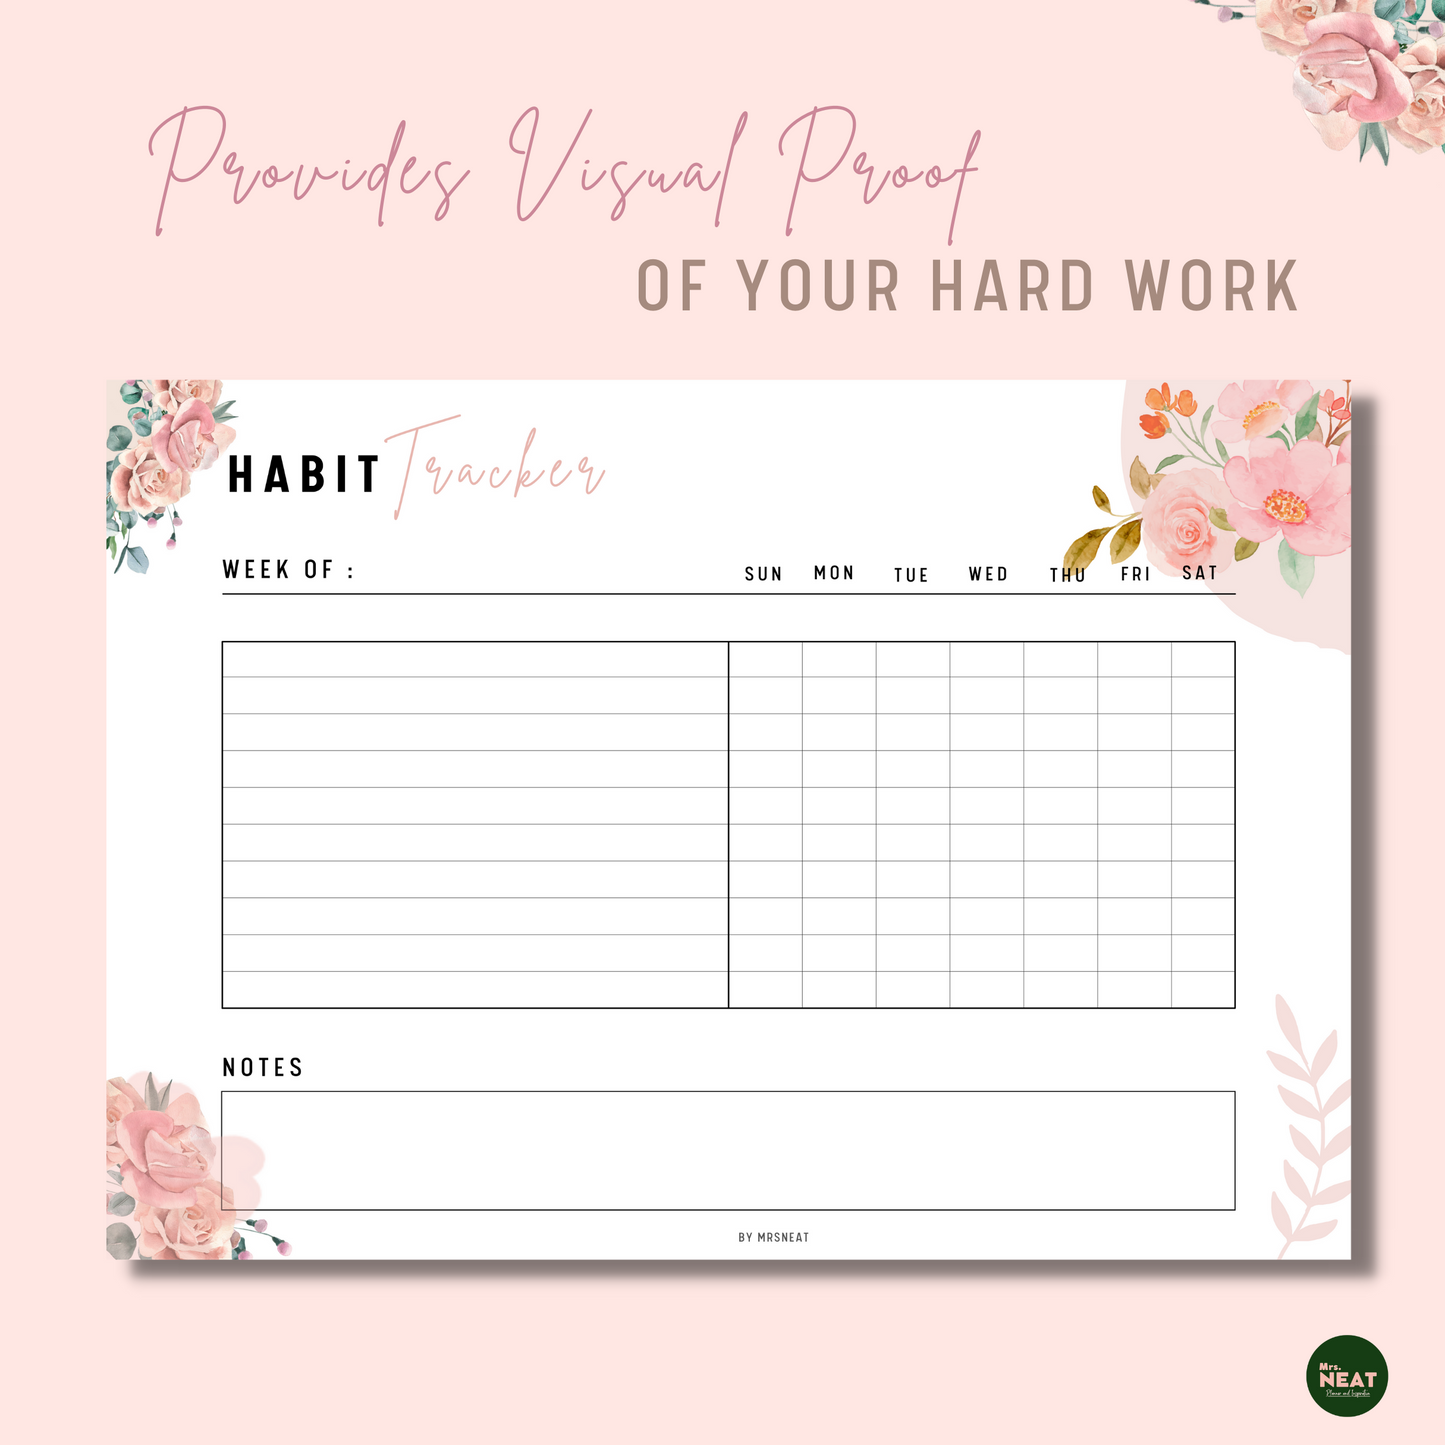 Rose Gold Floral Weekly Habit Tracker Planner as visual proof of the hard work with rooms for habits and notes